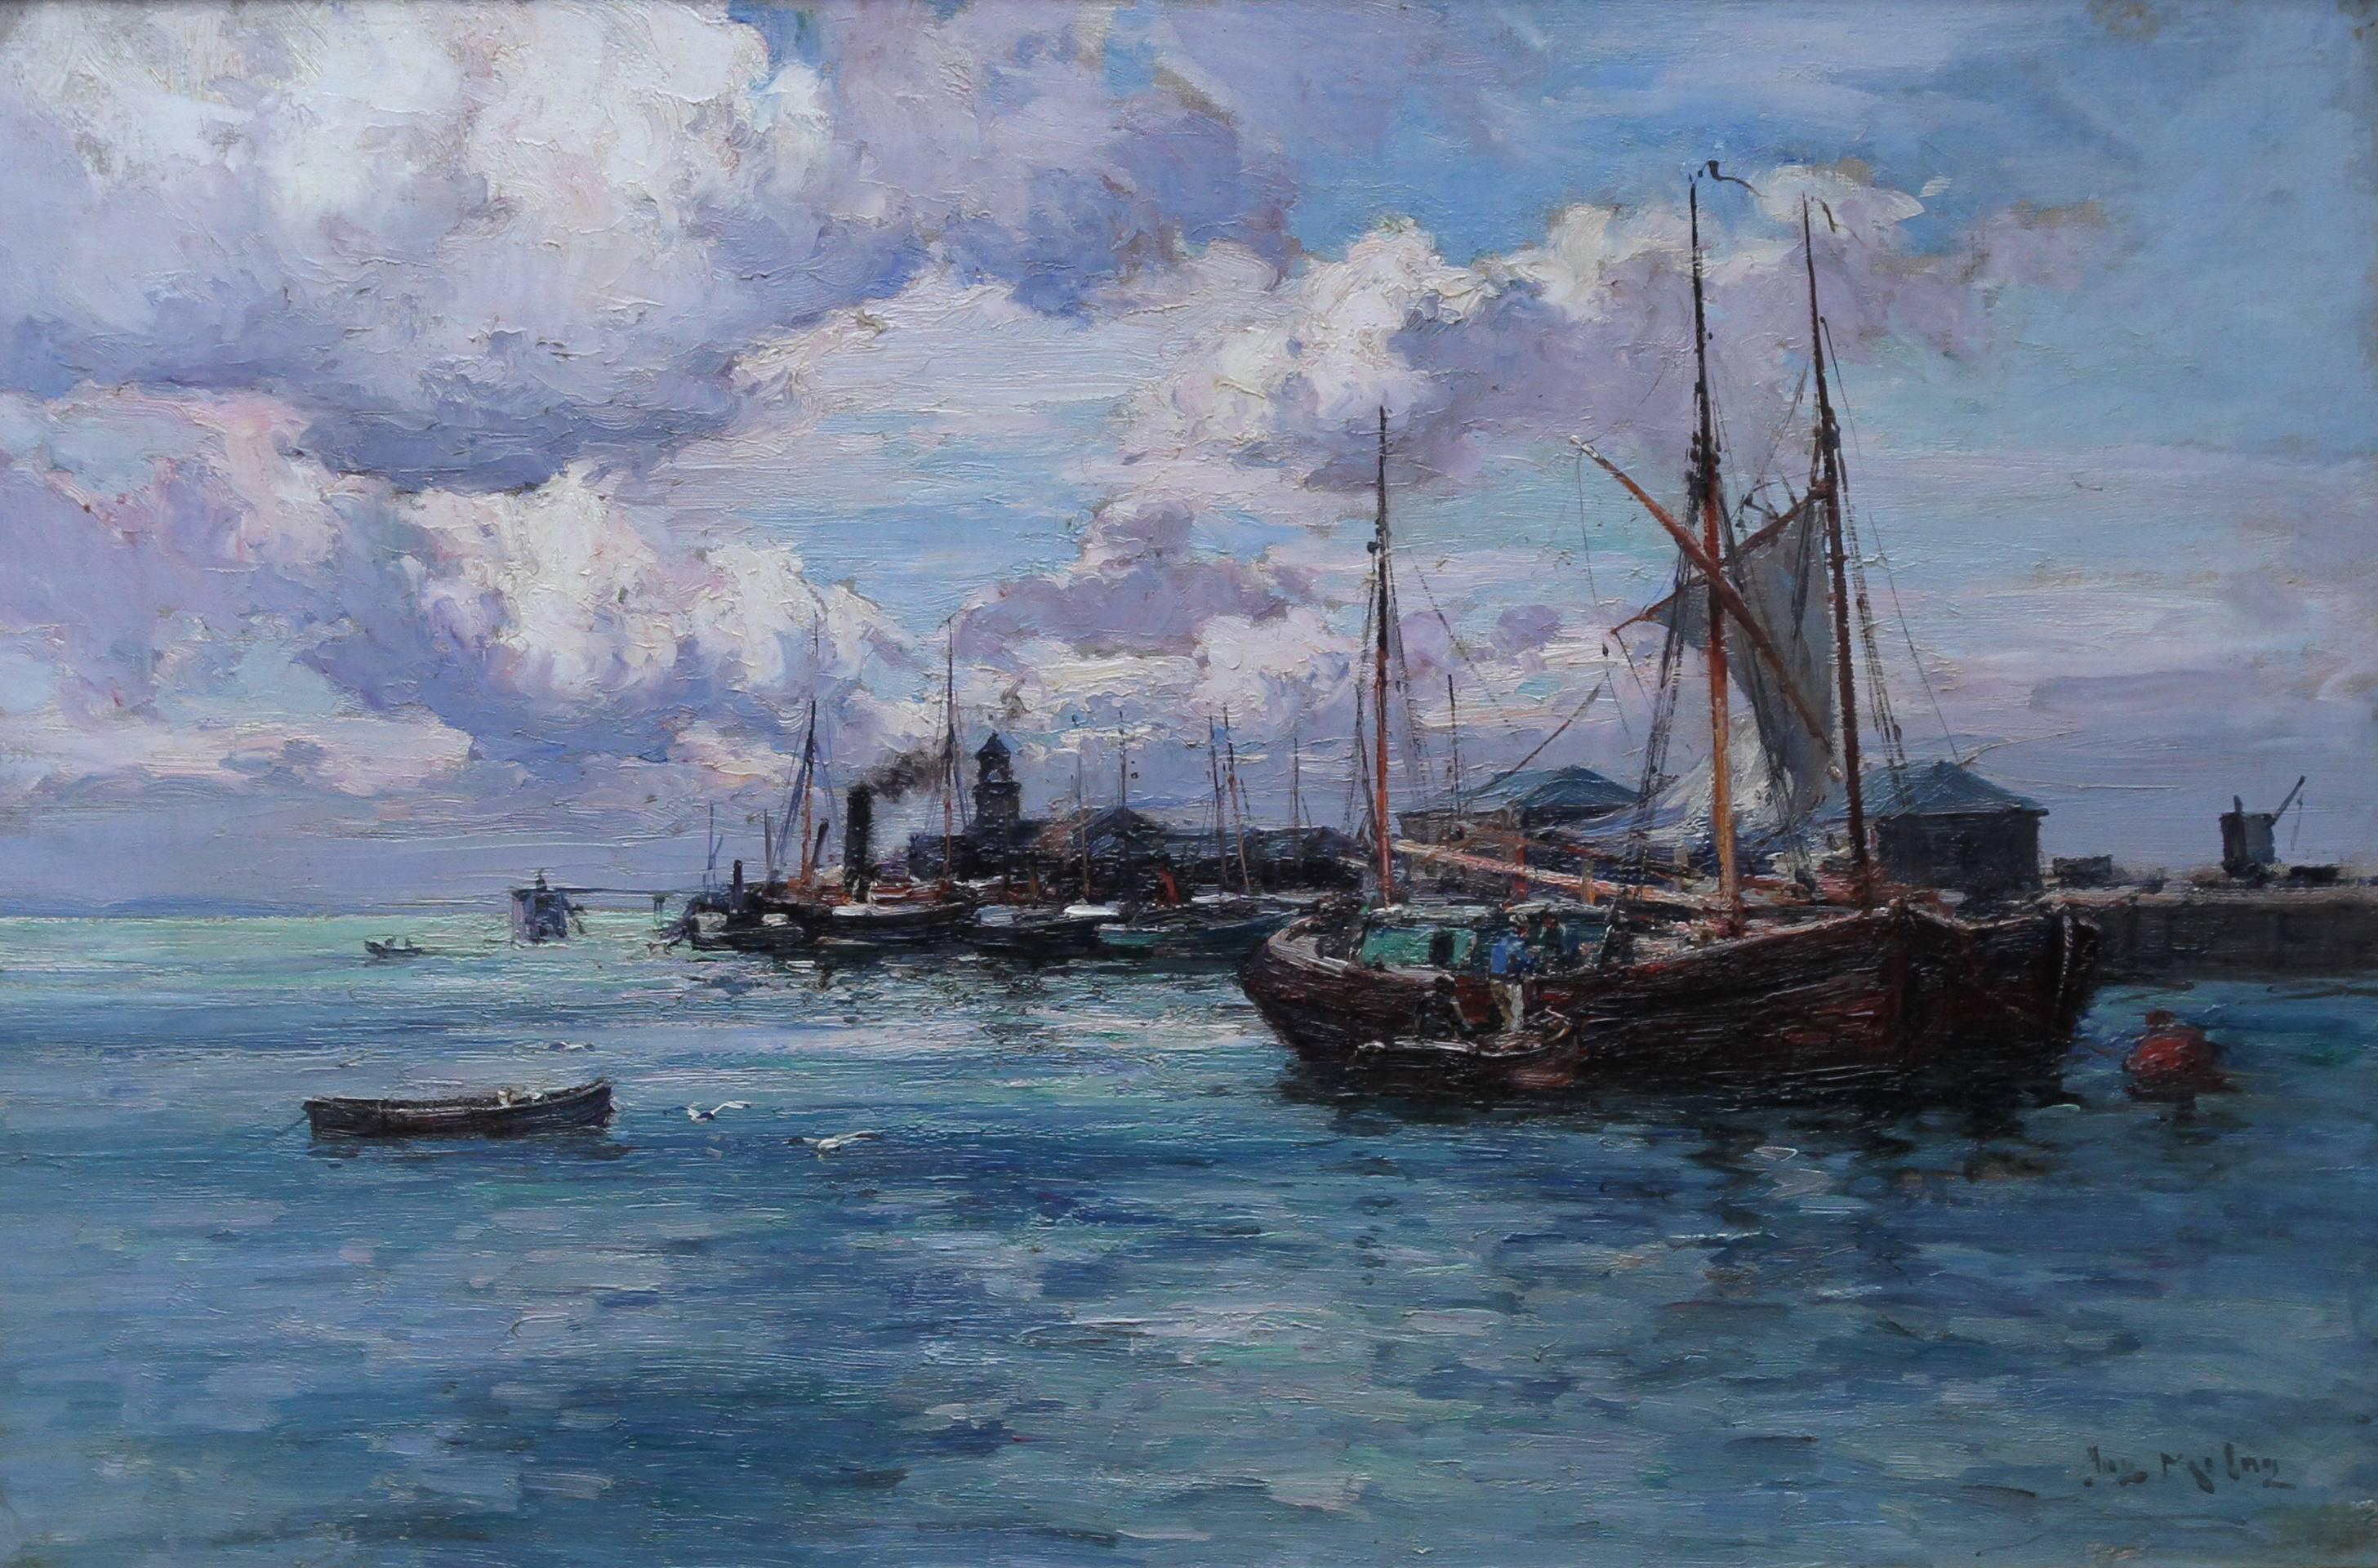 Boats at Harbour - Scottish art Victorian Impressionist oil painting seascape 3